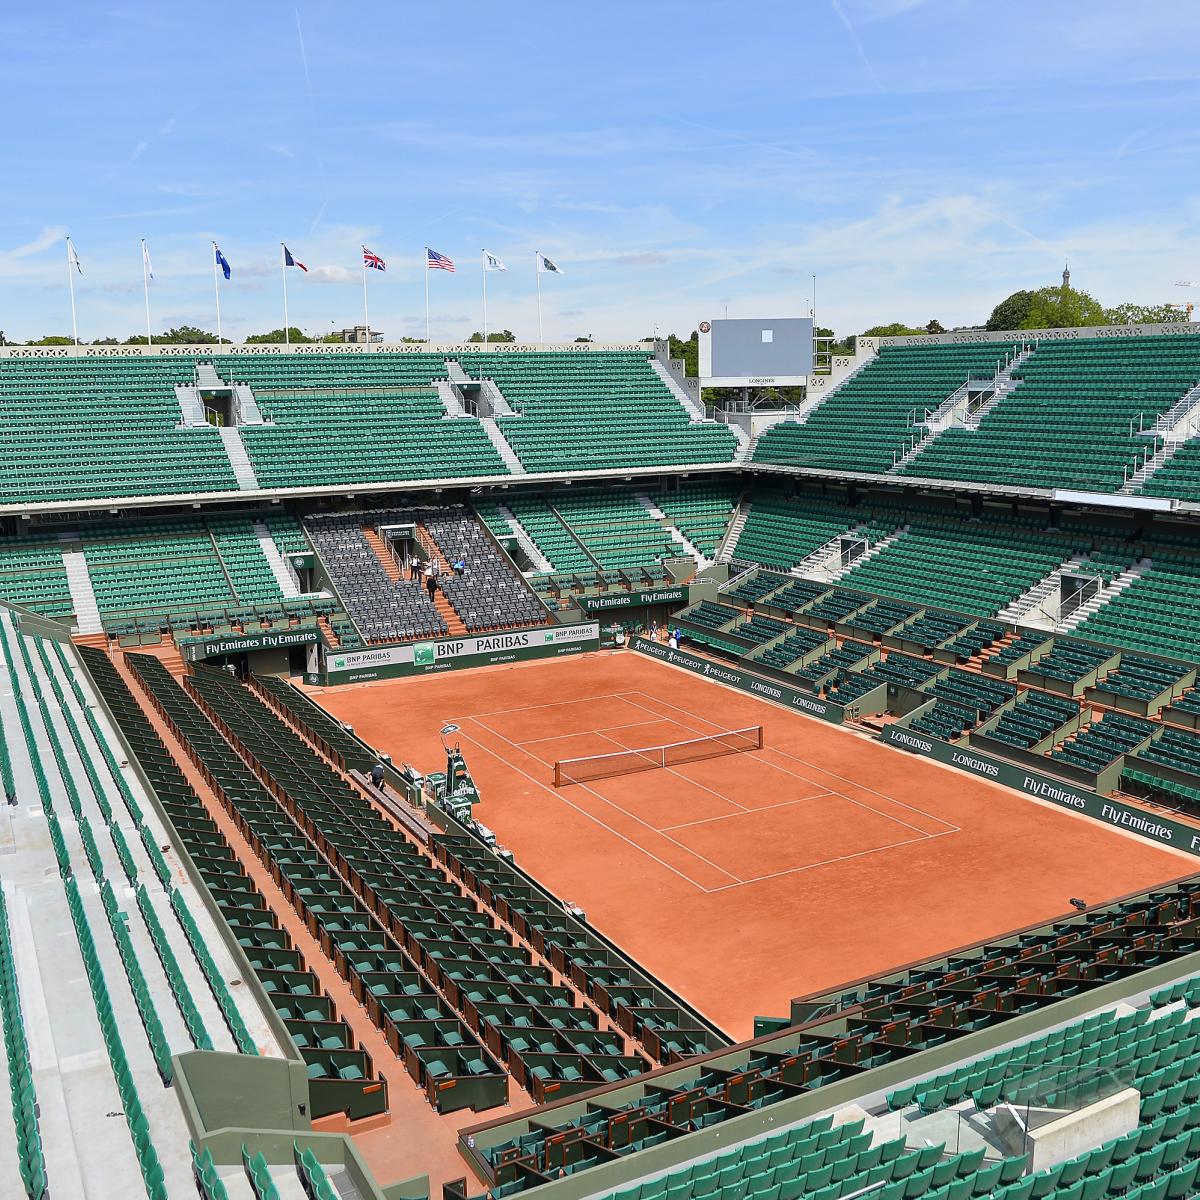 French Open 2017 Draw Results, Seedings for Men and Women's Brackets